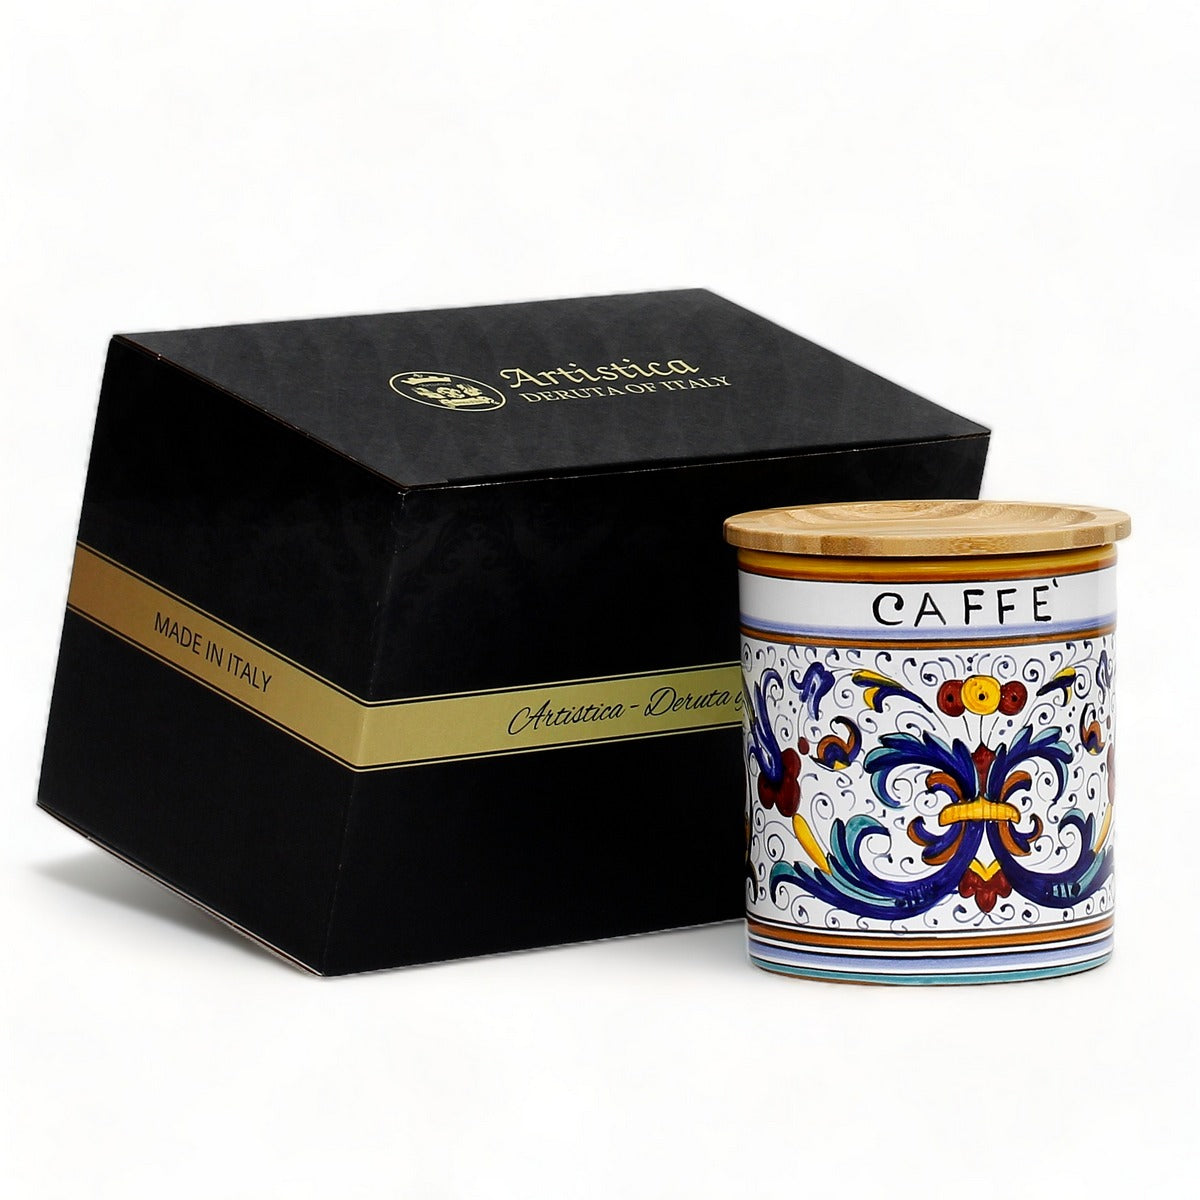 GIFT BOX: With authentic Deruta hand painted ceramic - NEW! Coffee Canister with Bamboo Sealing Lid Ricco Deruta Design